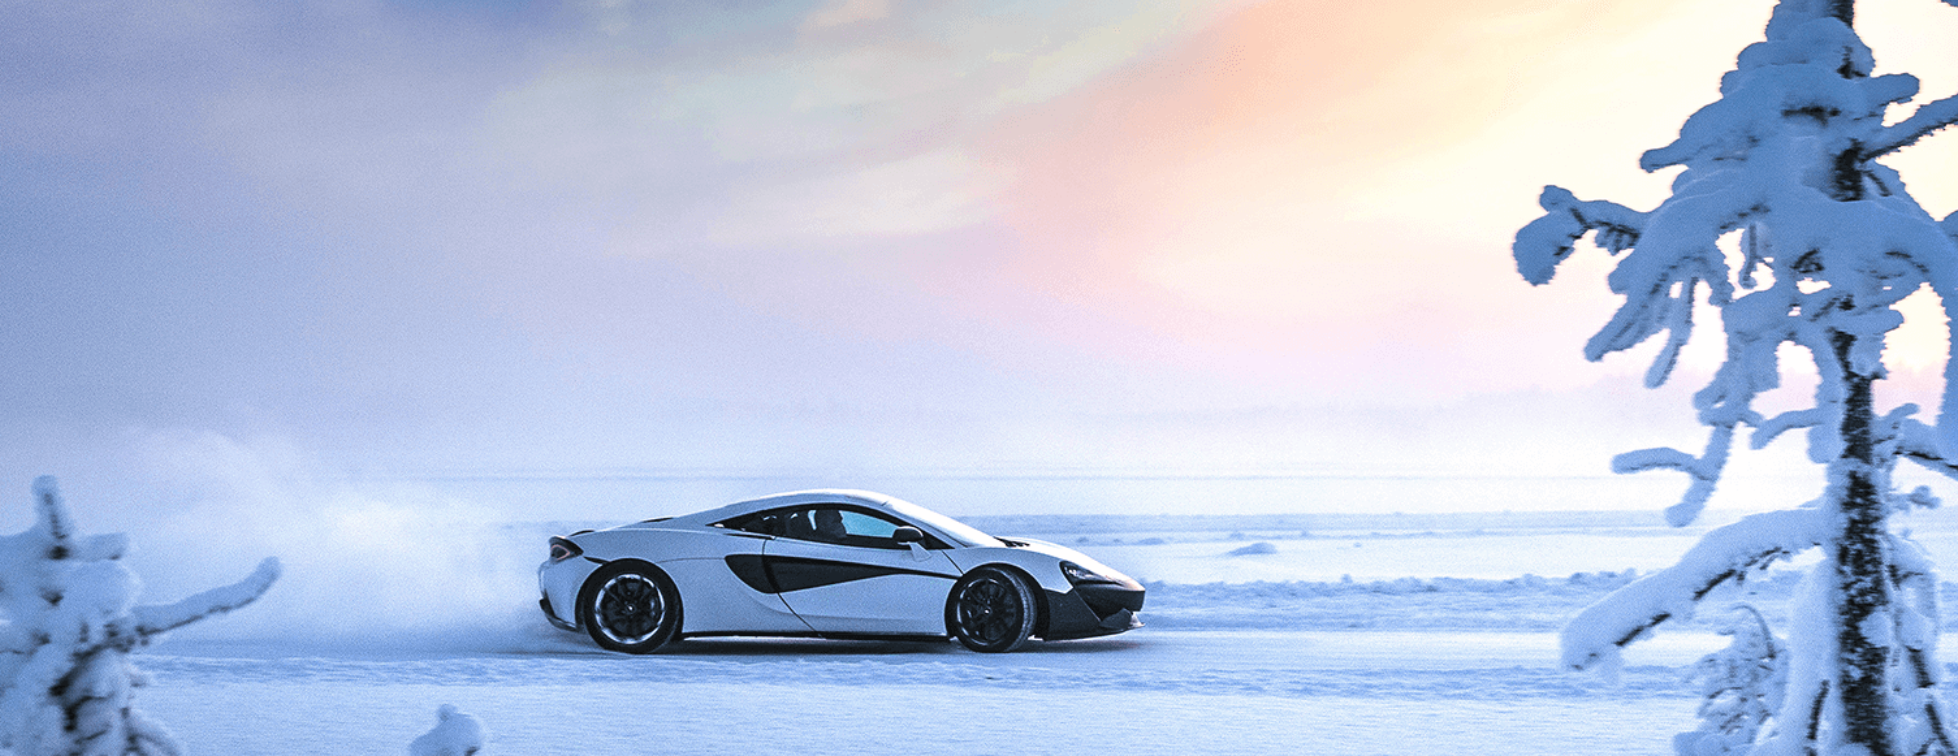 Pure McLaren Arctic Experience - Sports Car Driving on Ice in Finland!